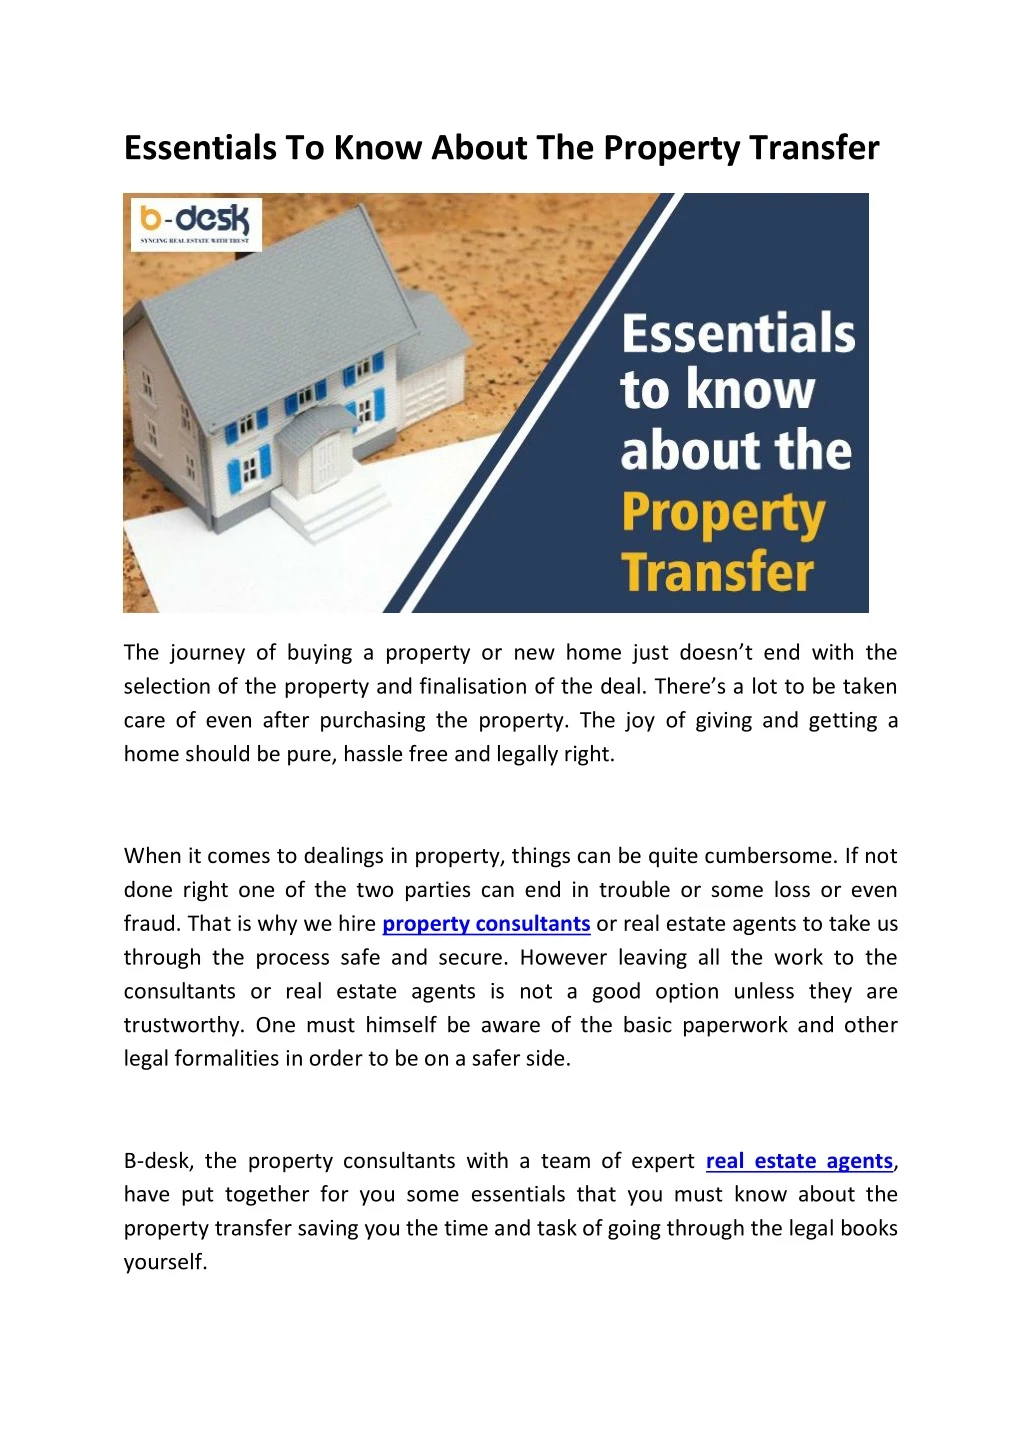 essentials to know about the property transfer